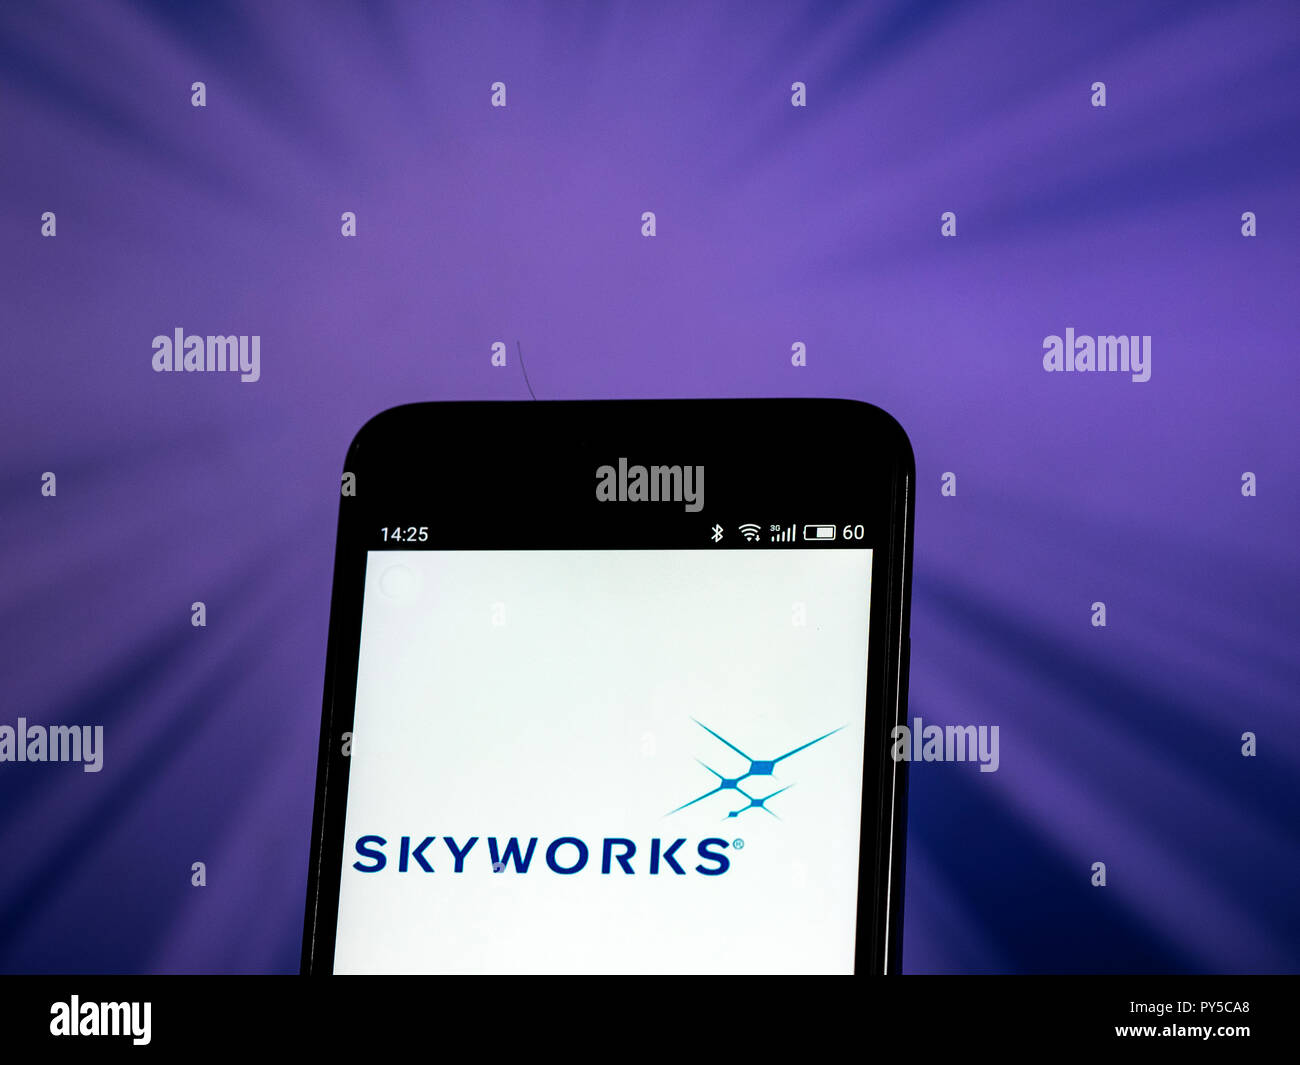 Skyworks Solutions Semiconductor manufacturing company logo seen displayed on smart phone. Skyworks manufactures semiconductors for use in radio frequency and mobile communications systems. Stock Photo